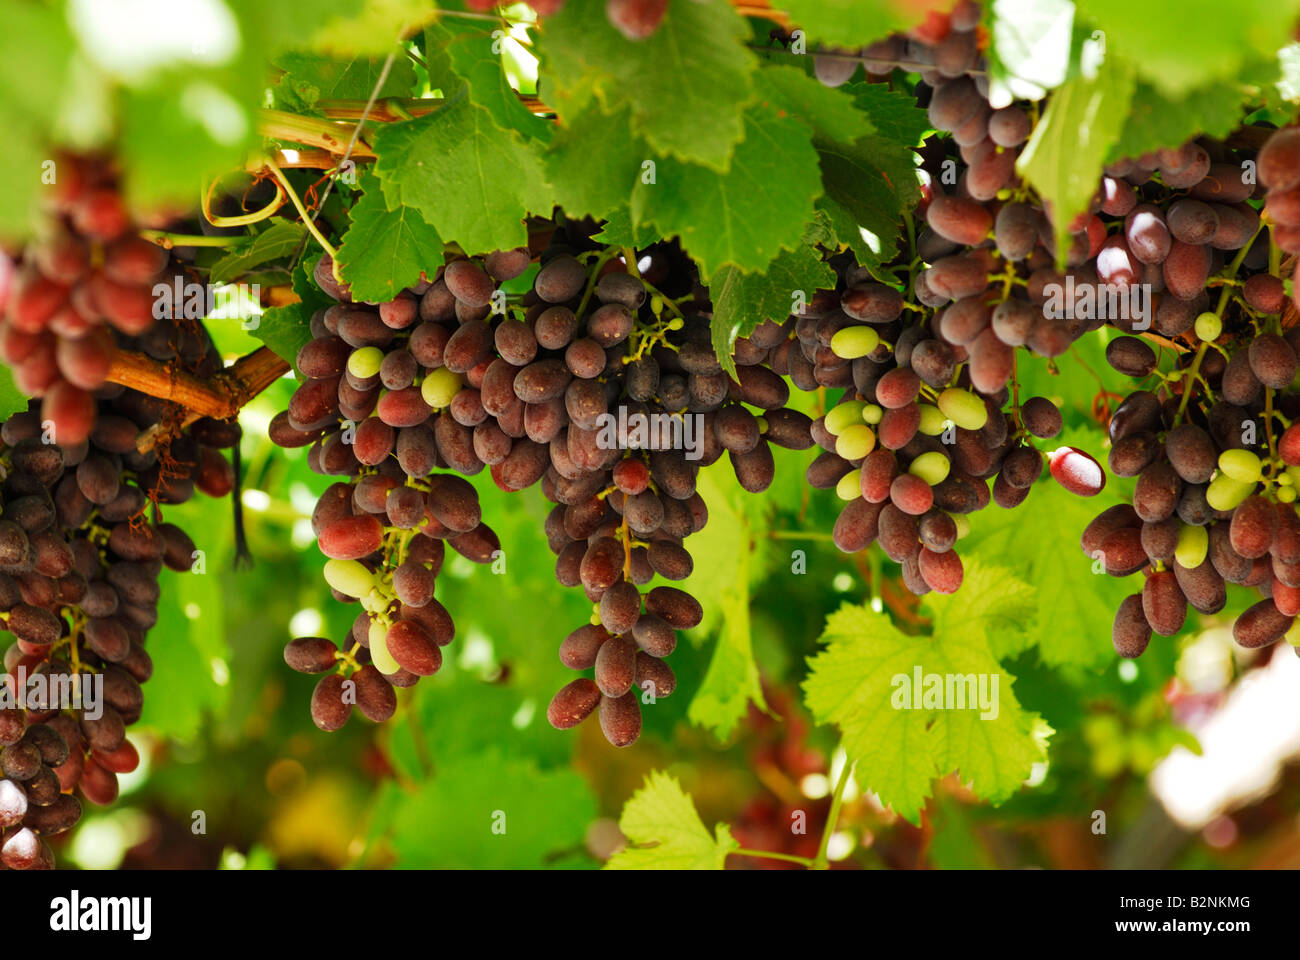 Grapes on the vine in Murcia region Spain early August Stock Photo